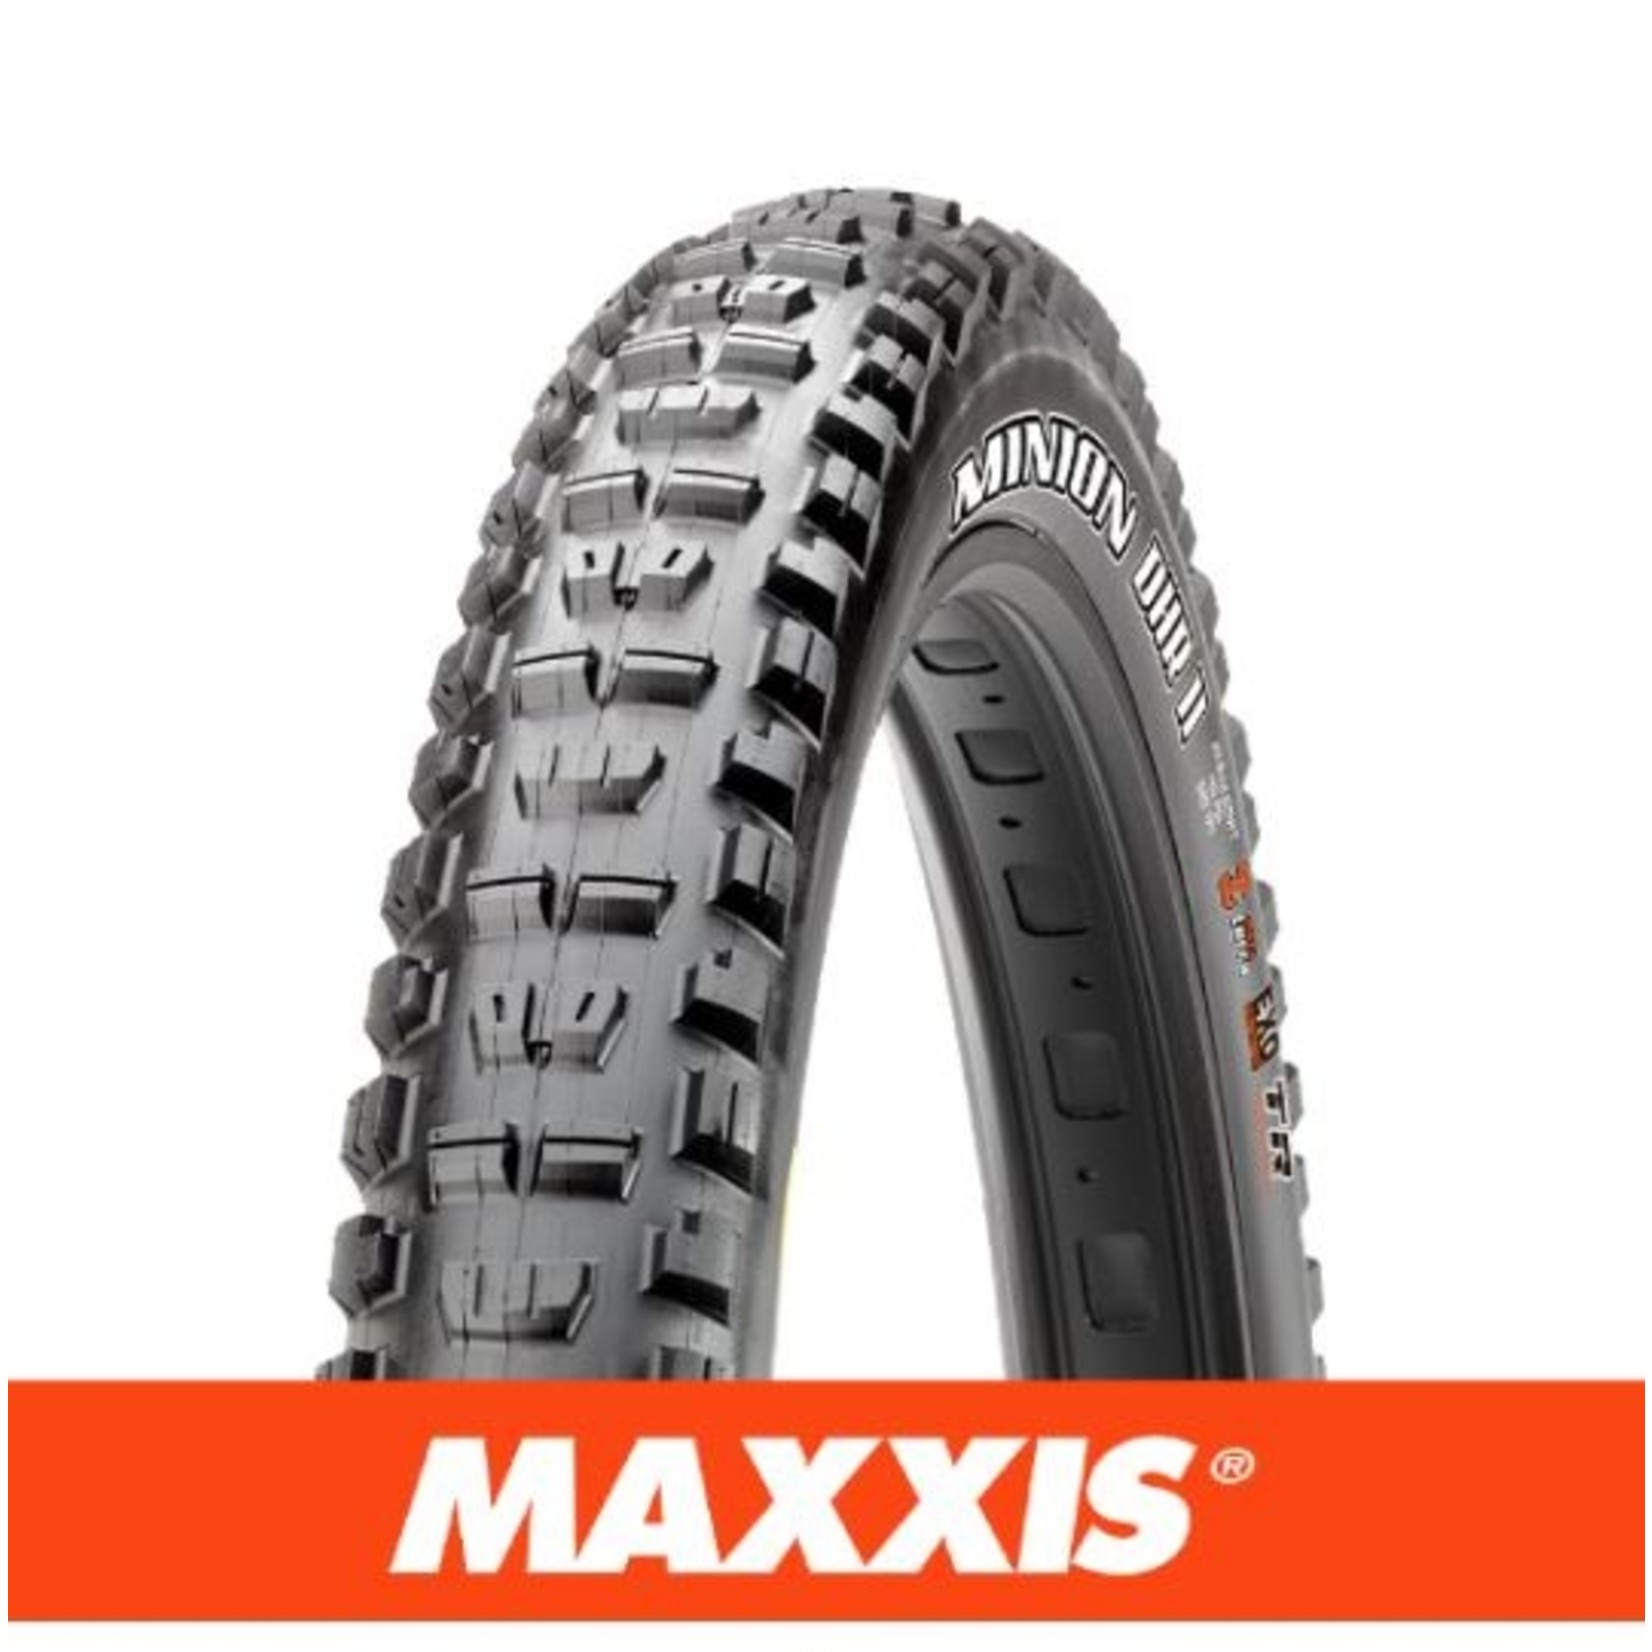 Maxxis Maxxis High Roller II Bike Tyre - 26 X 2.40 - Wirebead 60TPIX2 DH 42A